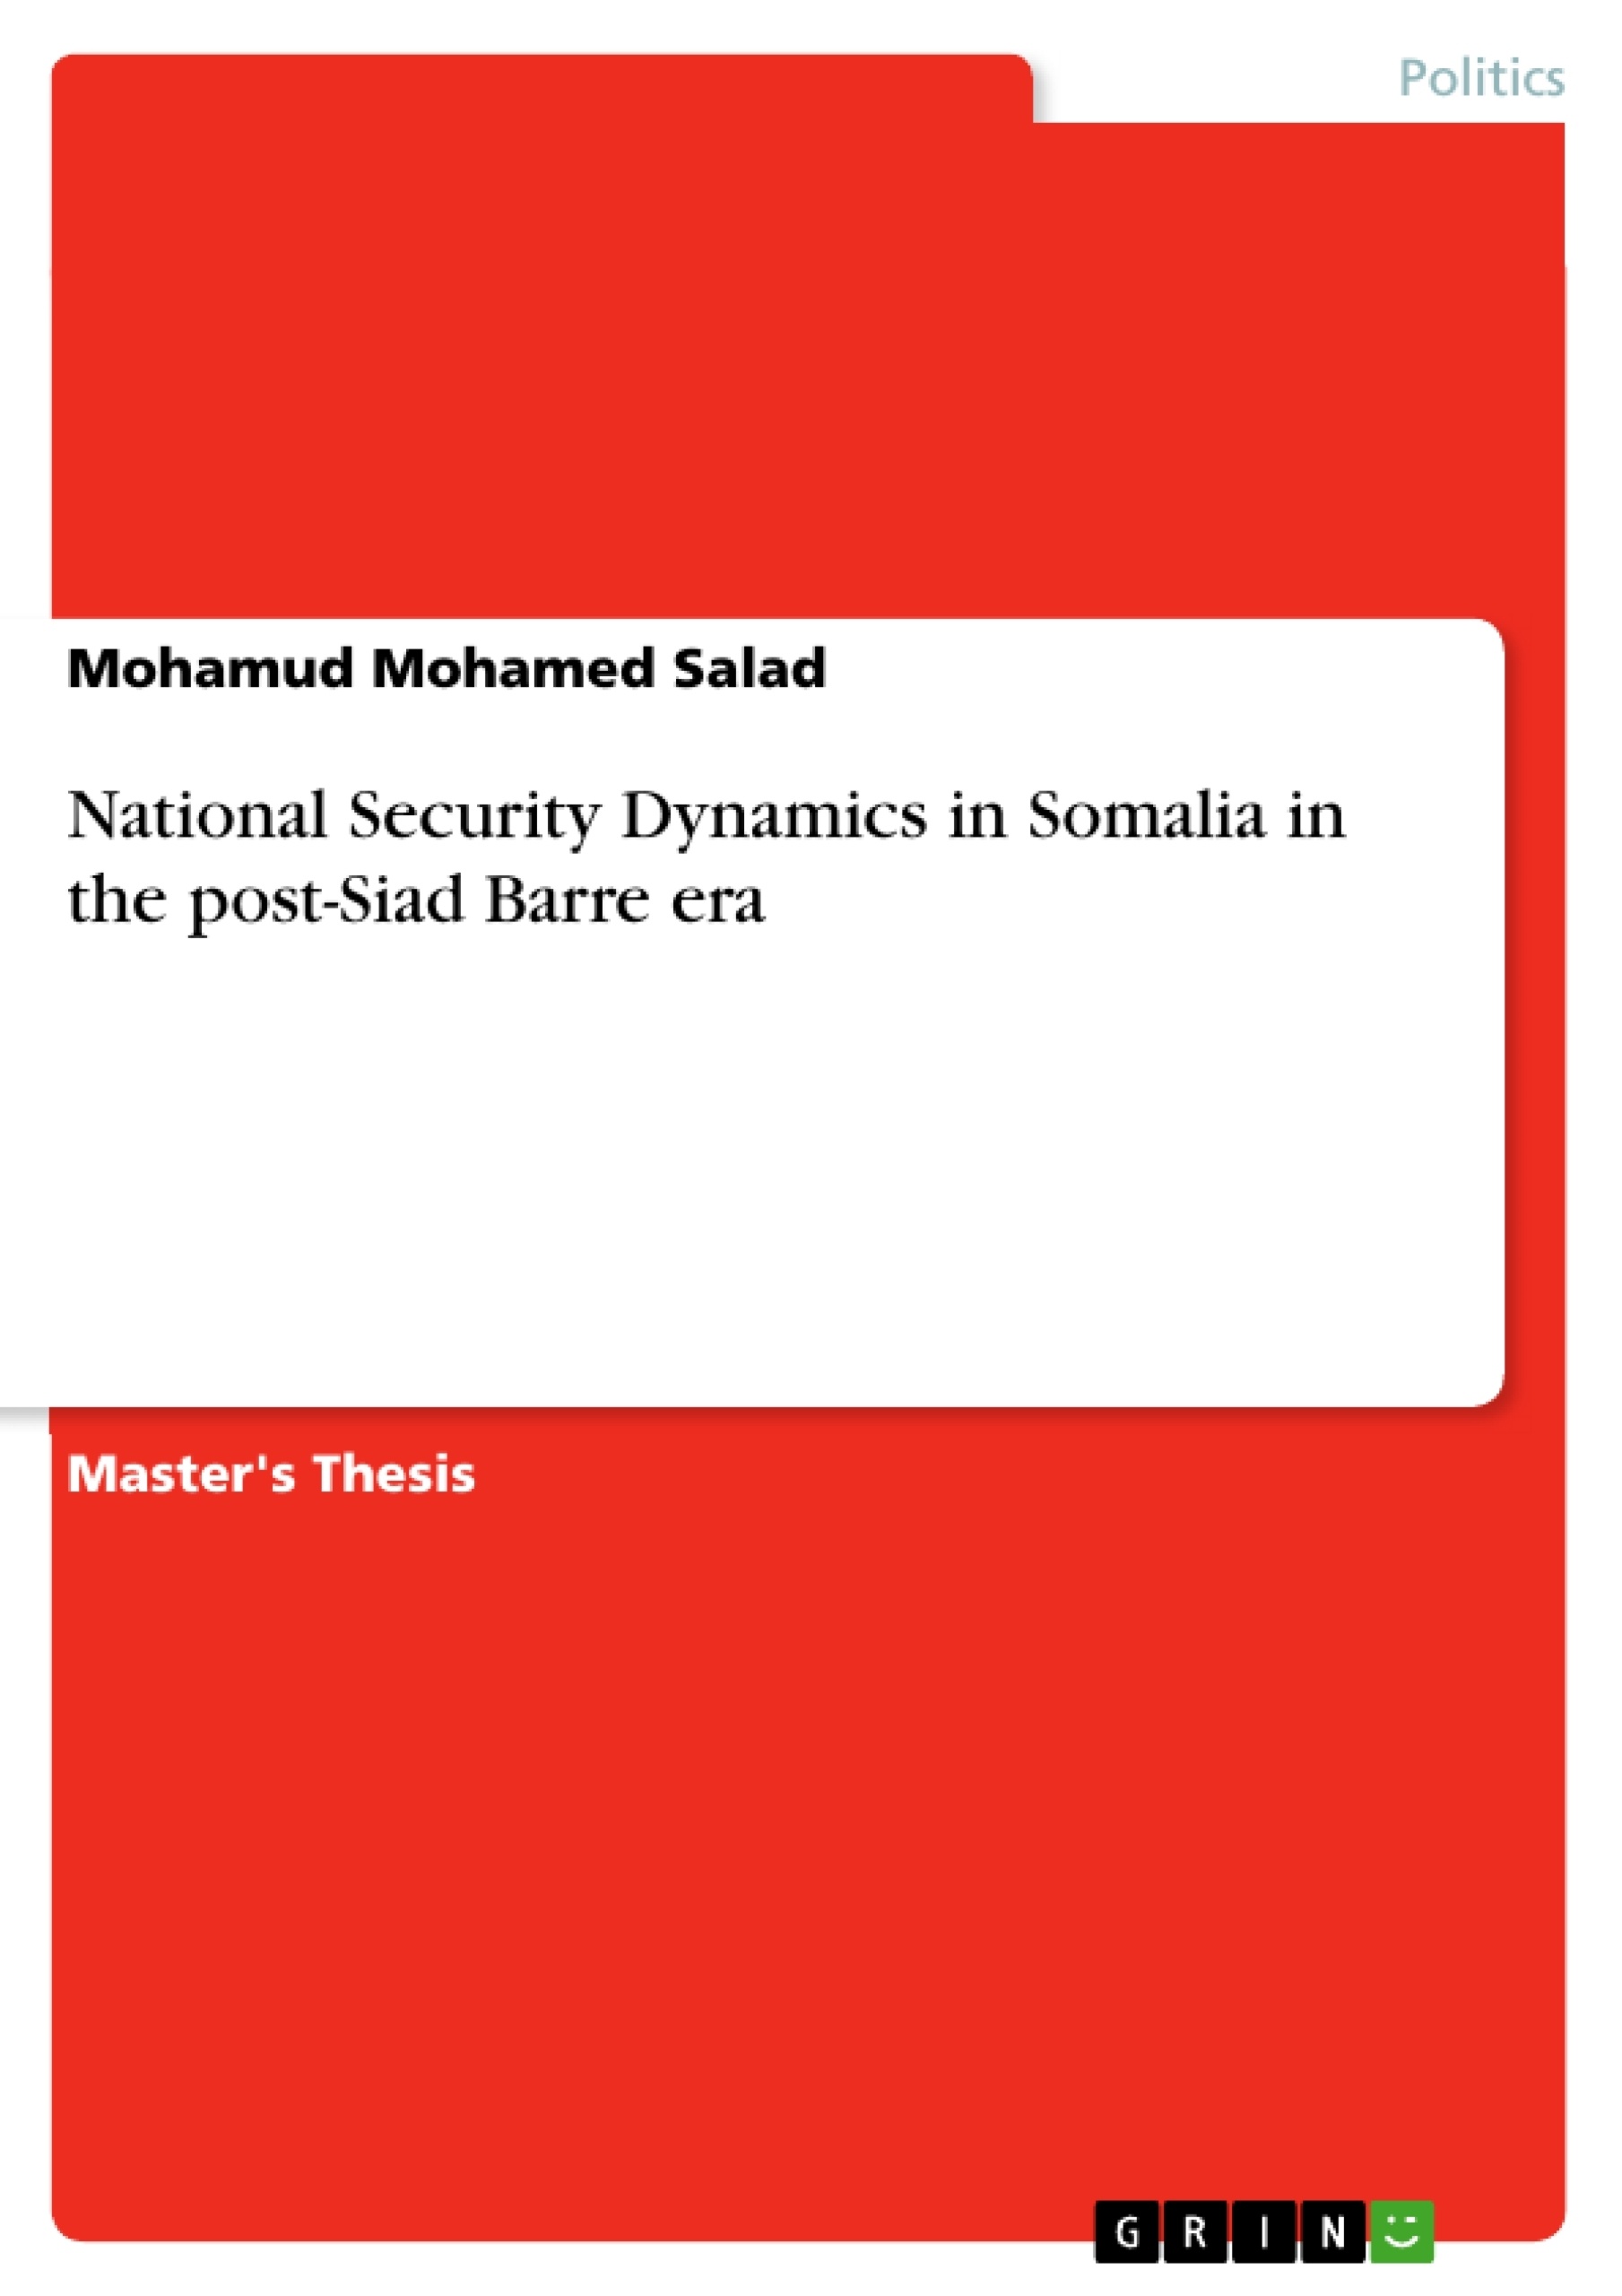 Title: National Security Dynamics in Somalia in the post-Siad Barre era